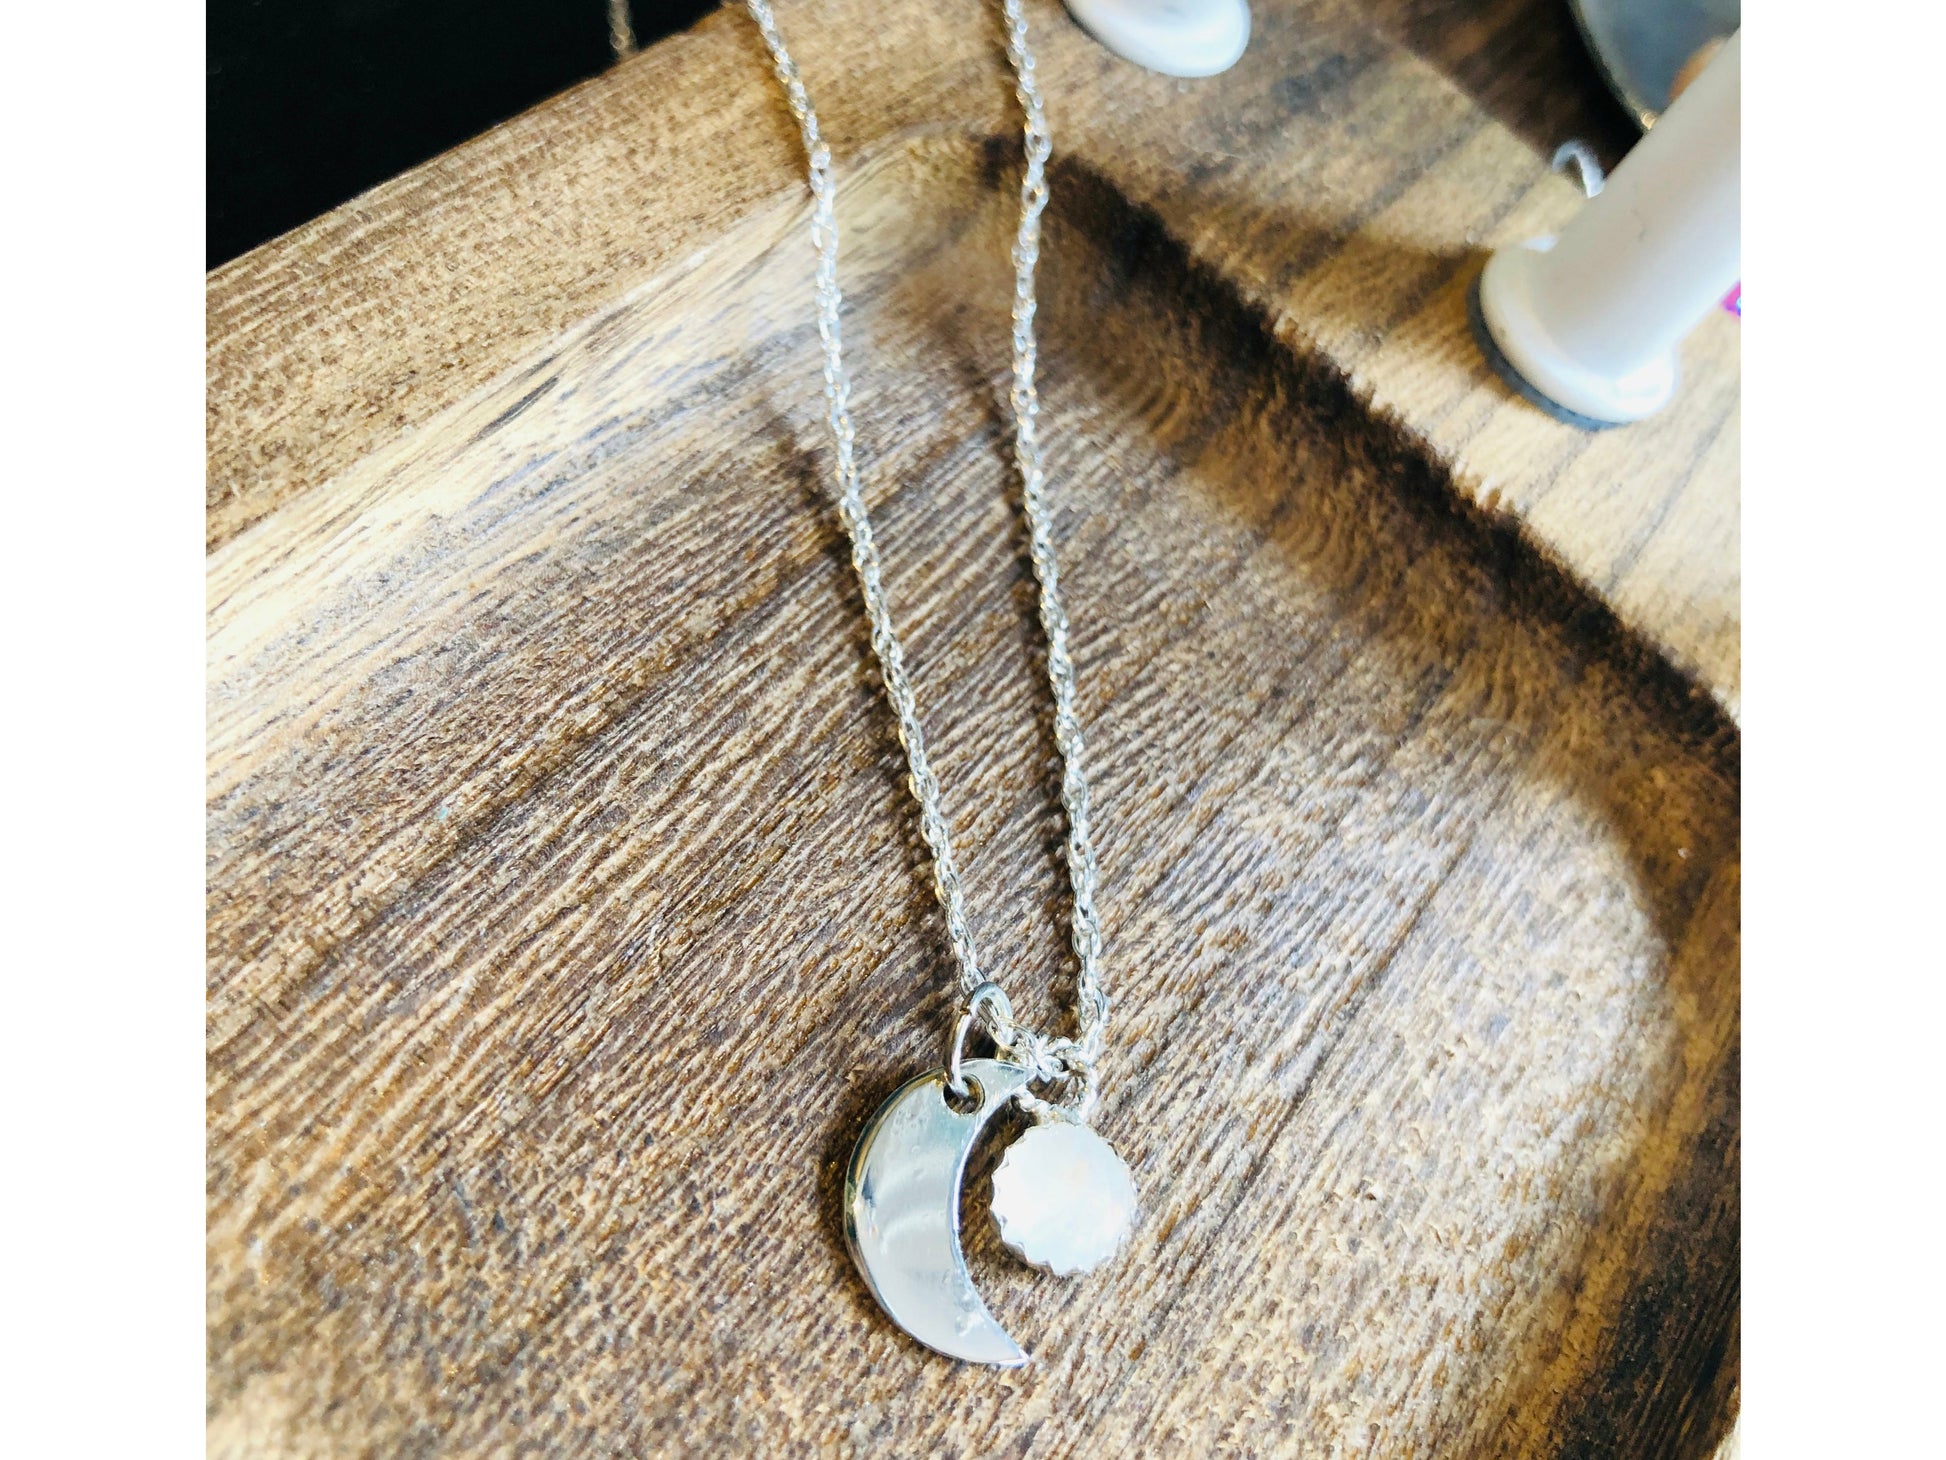 Small sliver of a moon mounted on a stainless steel chain